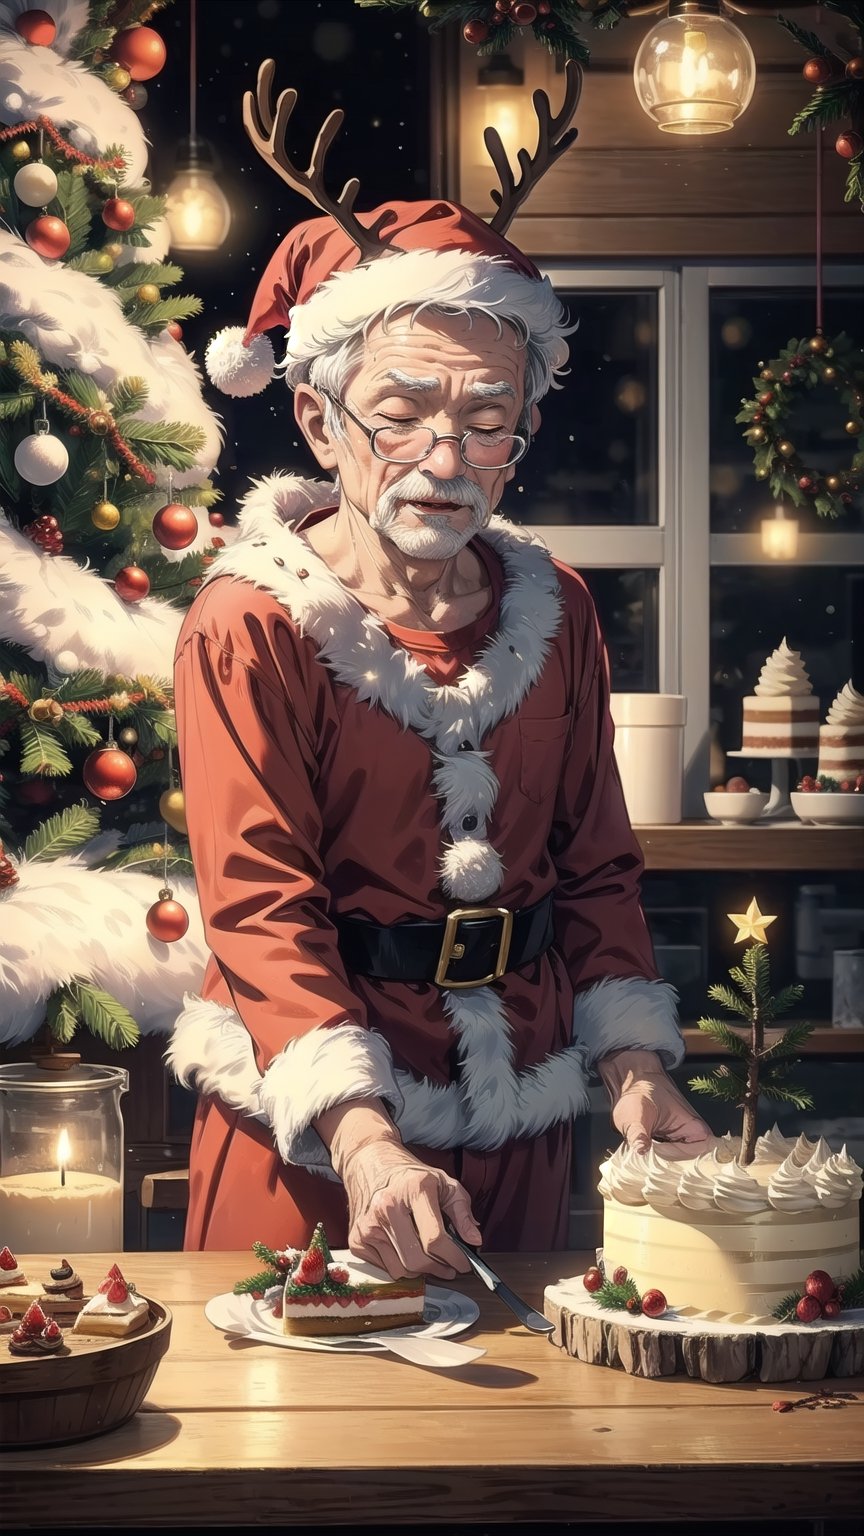 santa claus, (santa costume), (decorating cake:1.2), old, old man, (eyes filled with concentration), (masterpiece best quality:1.2) delicate illustration ultra-detailed, BREAK ((small mascot of Santa Claus & reindeer:1.2) on the Christmas cake), BREAK (pastry shop indoors), Christmas, /(small Christmas tree/)